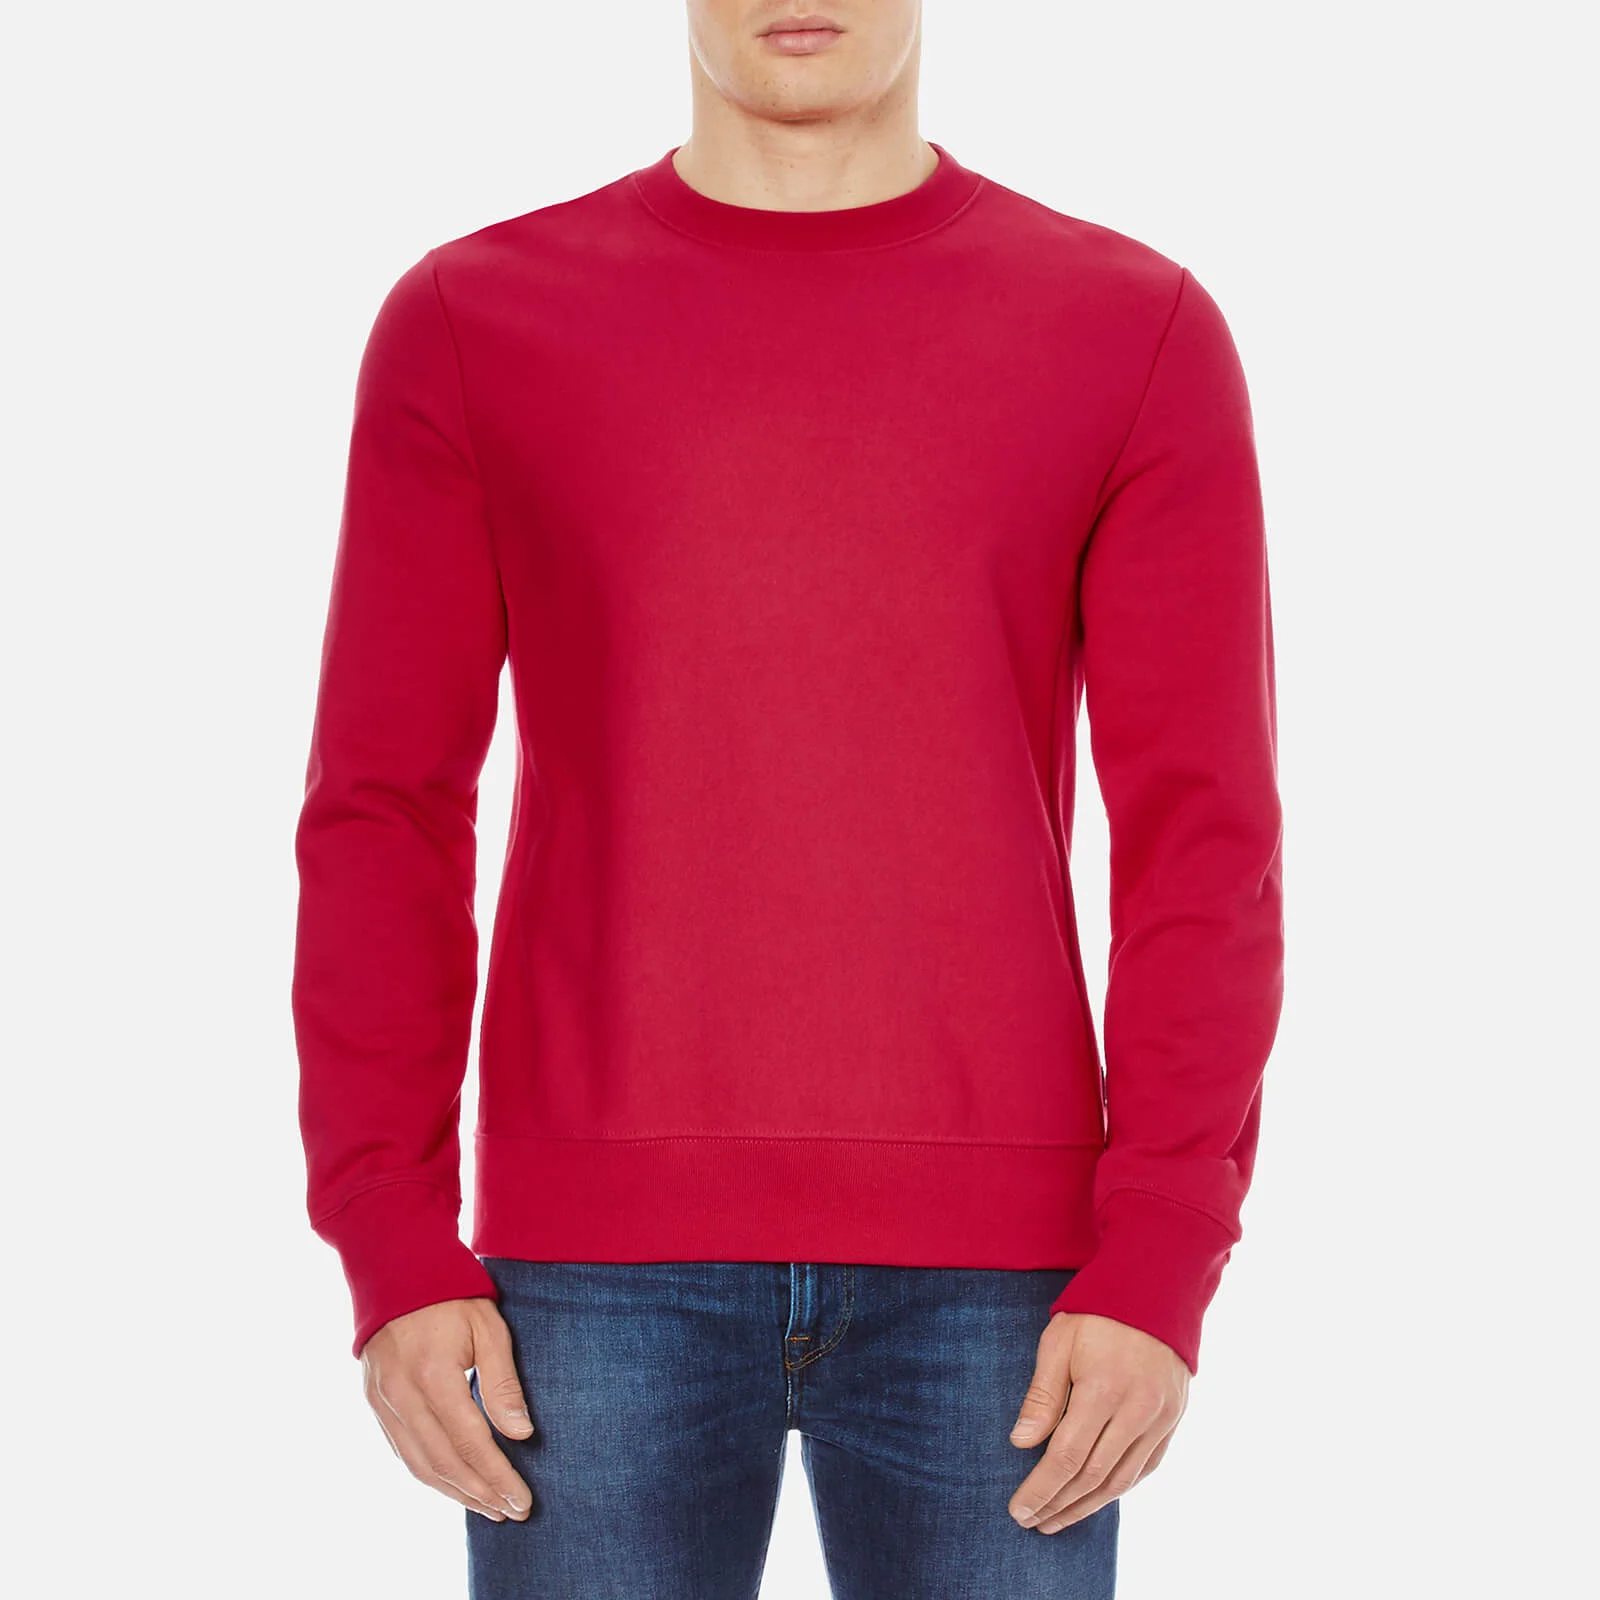 PS by Paul Smith Men's Cotton Sweater - Red Image 1